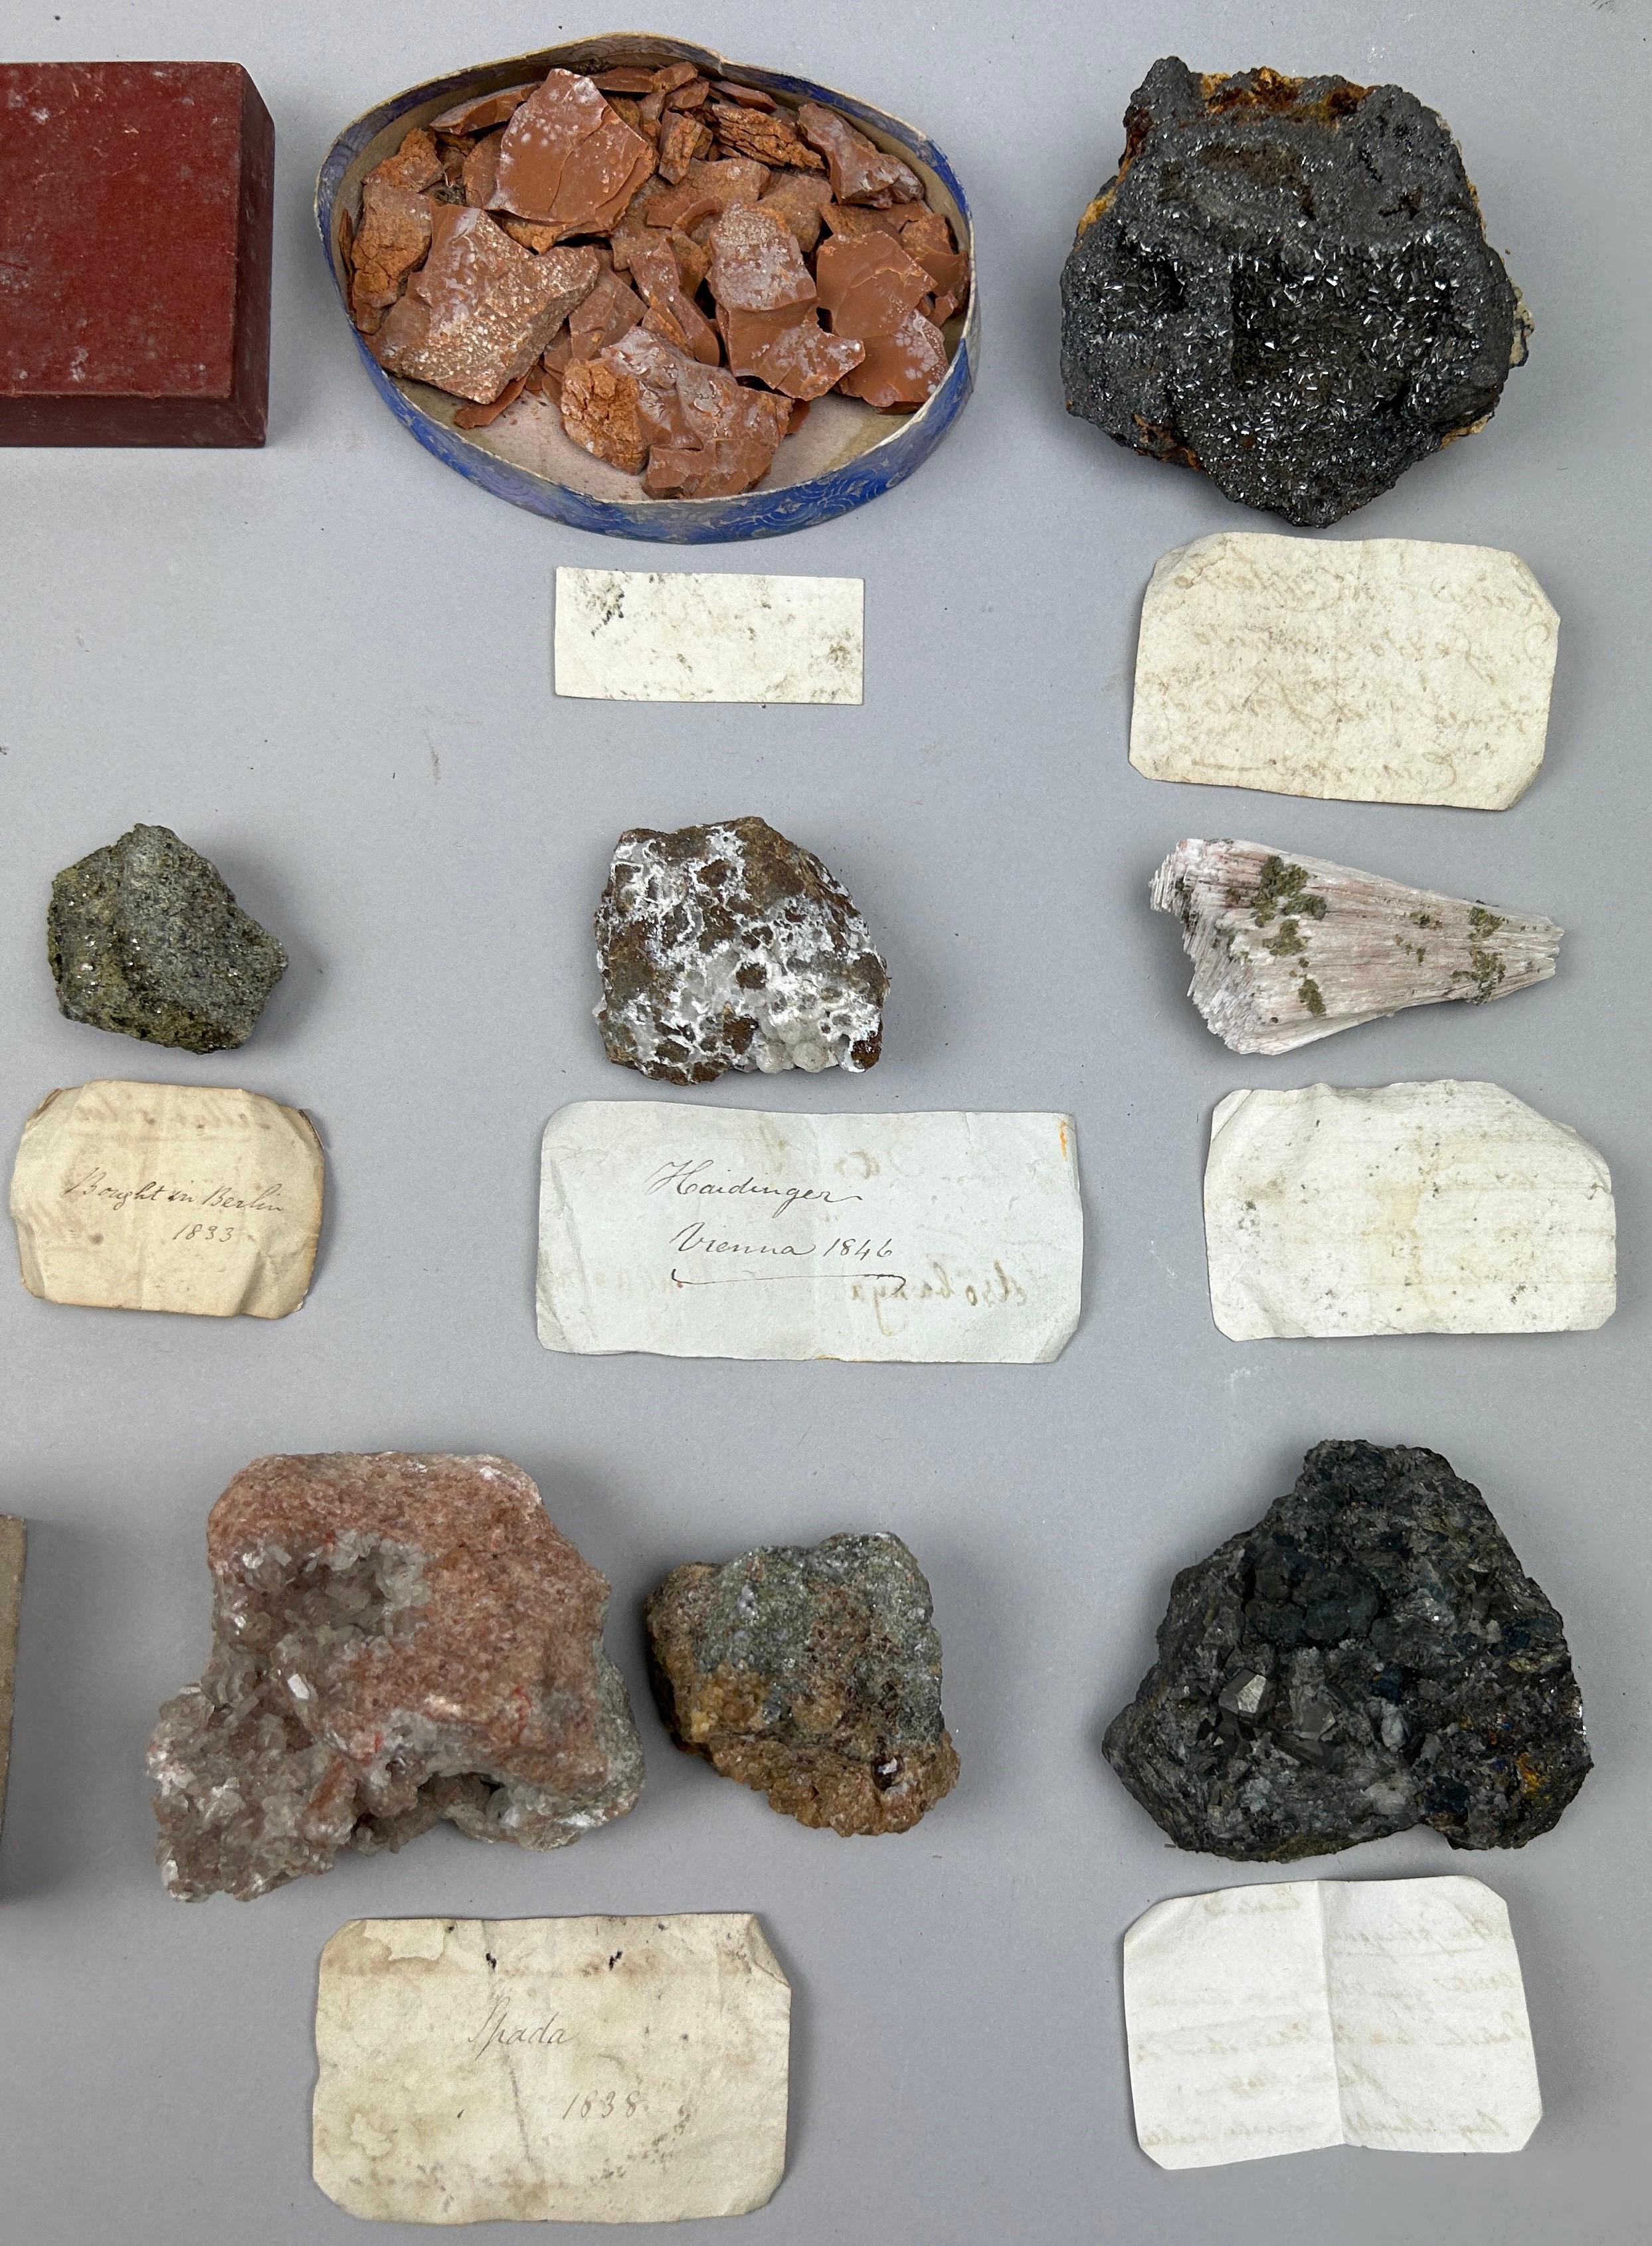 A RARE CABINET COLLECTION OF MINERALS CIRCA 1810-1860, including minerals probably collected by - Image 14 of 33